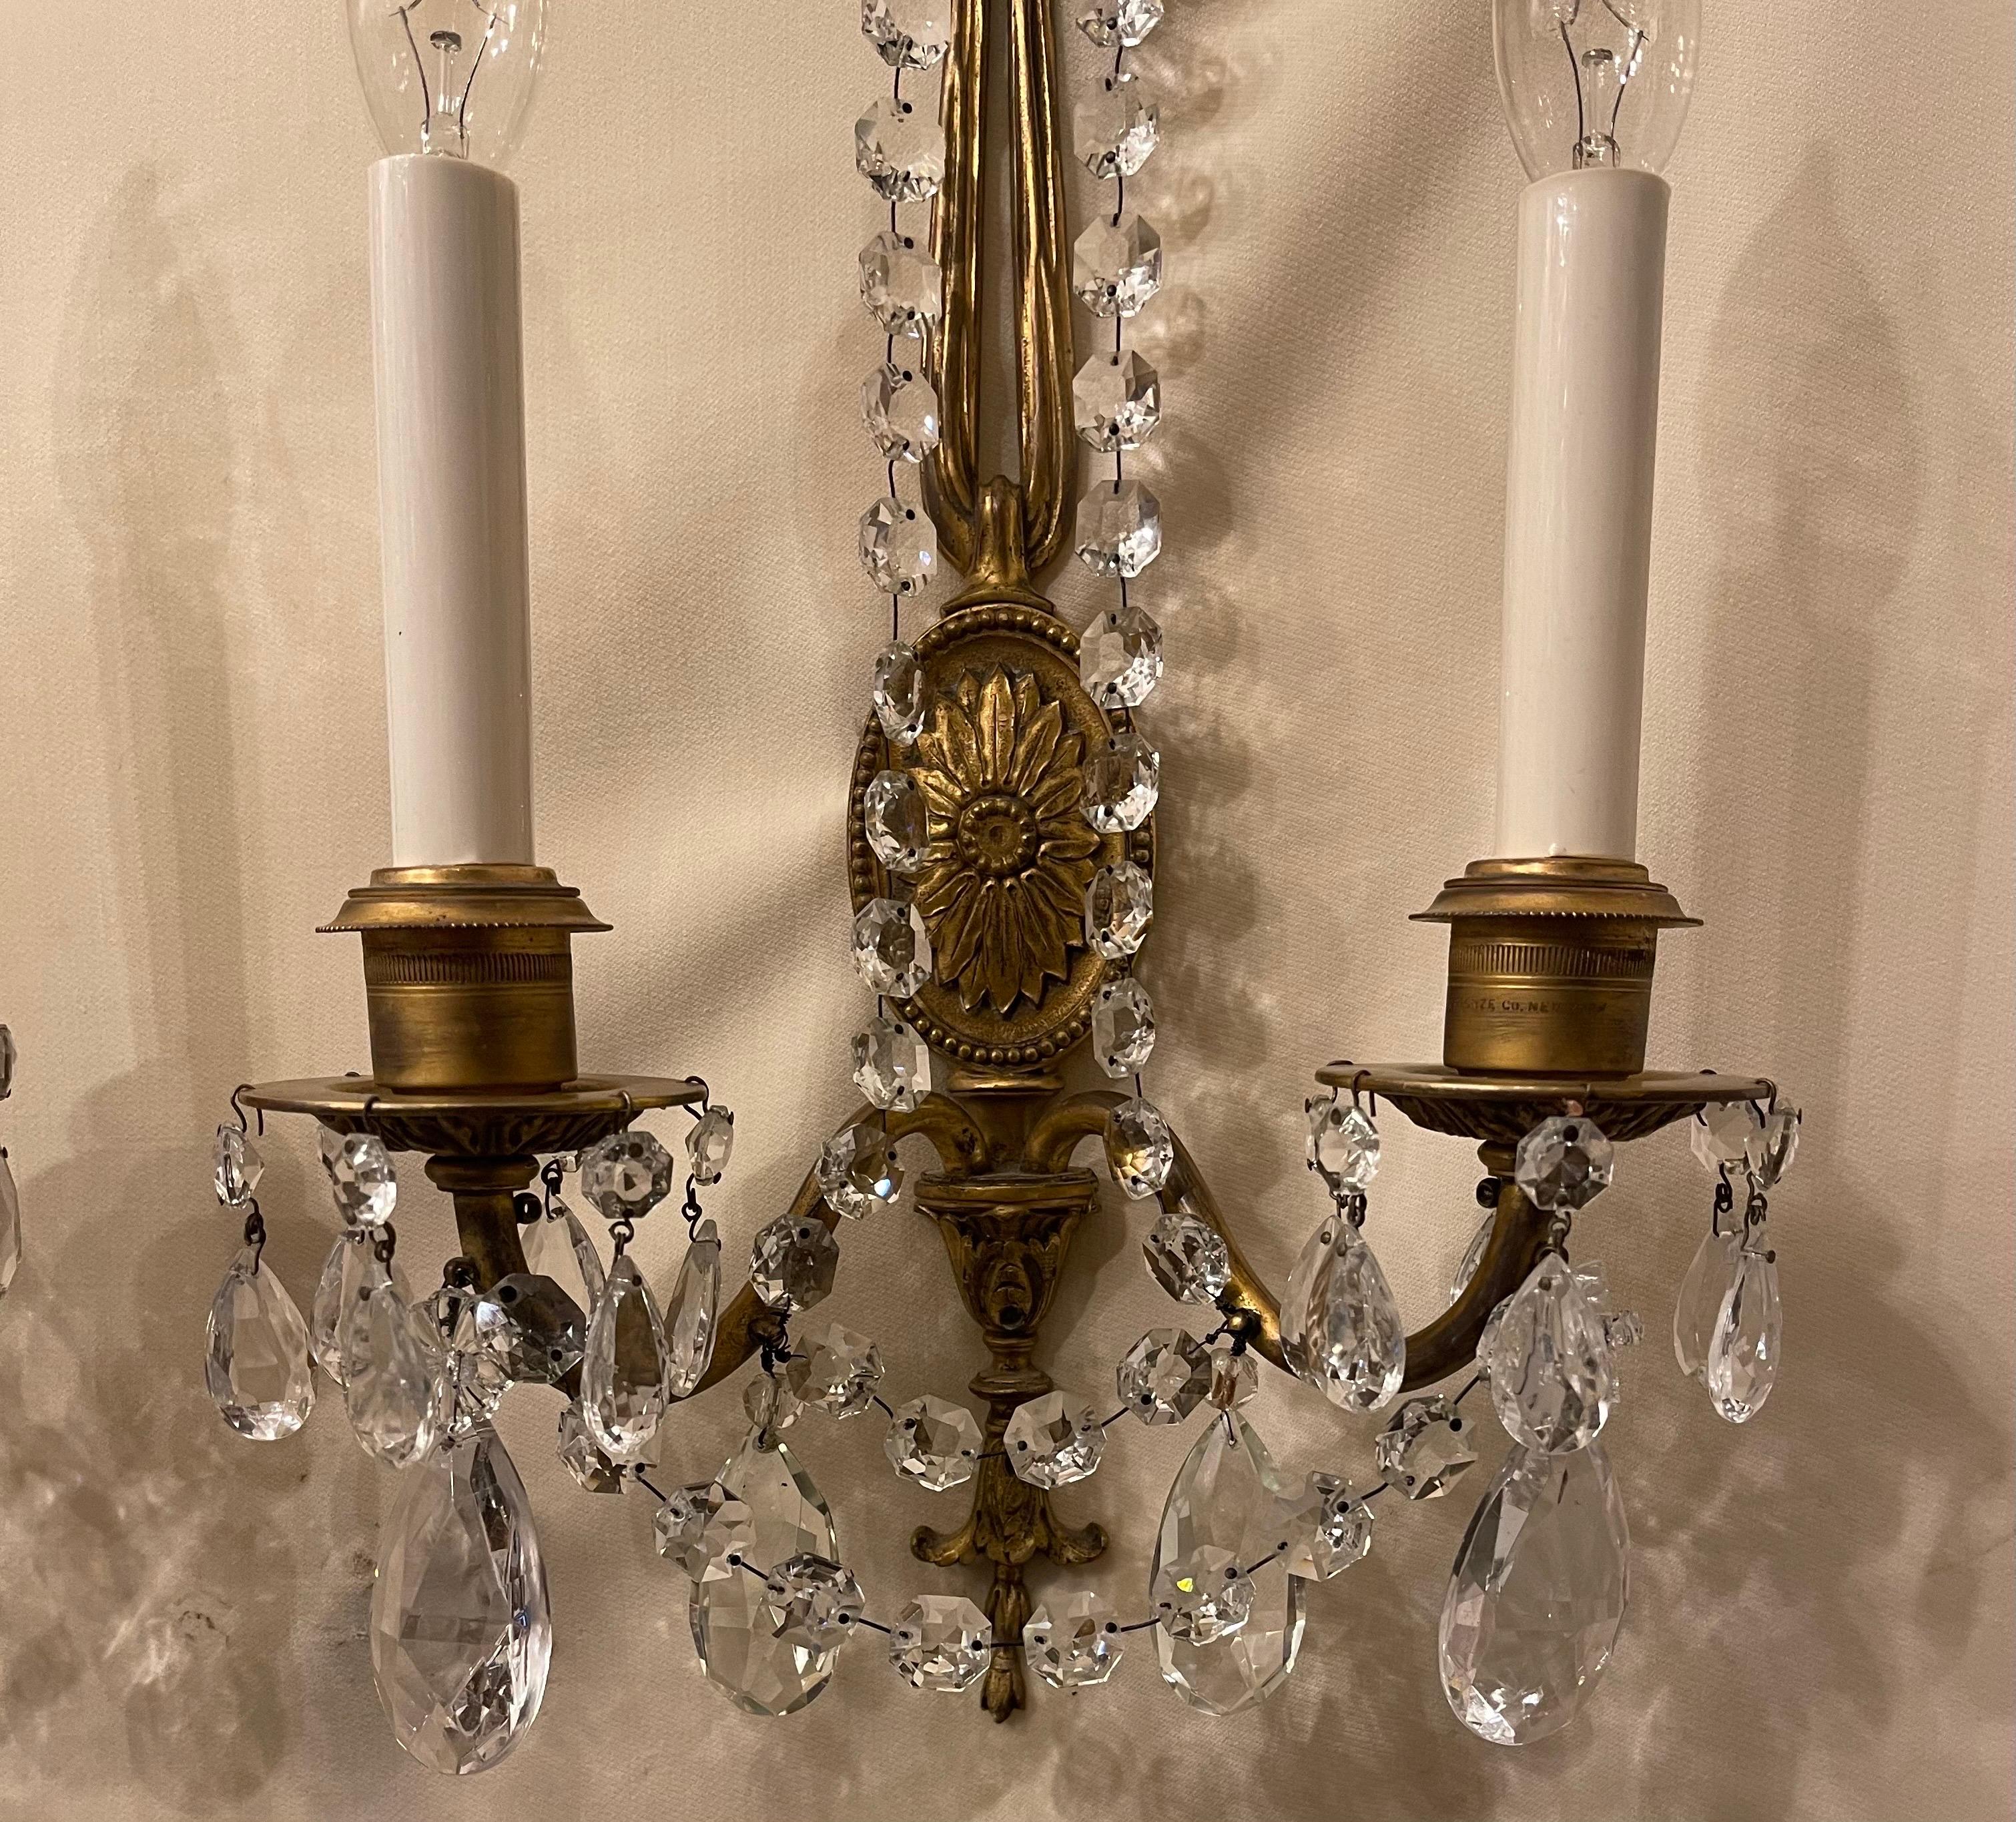 A Wonderful French Gilt bronze & crystal strand bow top and tassel two candelabra light sconce In The Manner Of Caldwell

Rewired With New Sockets And Come Ready To Install With Mounting Bracket